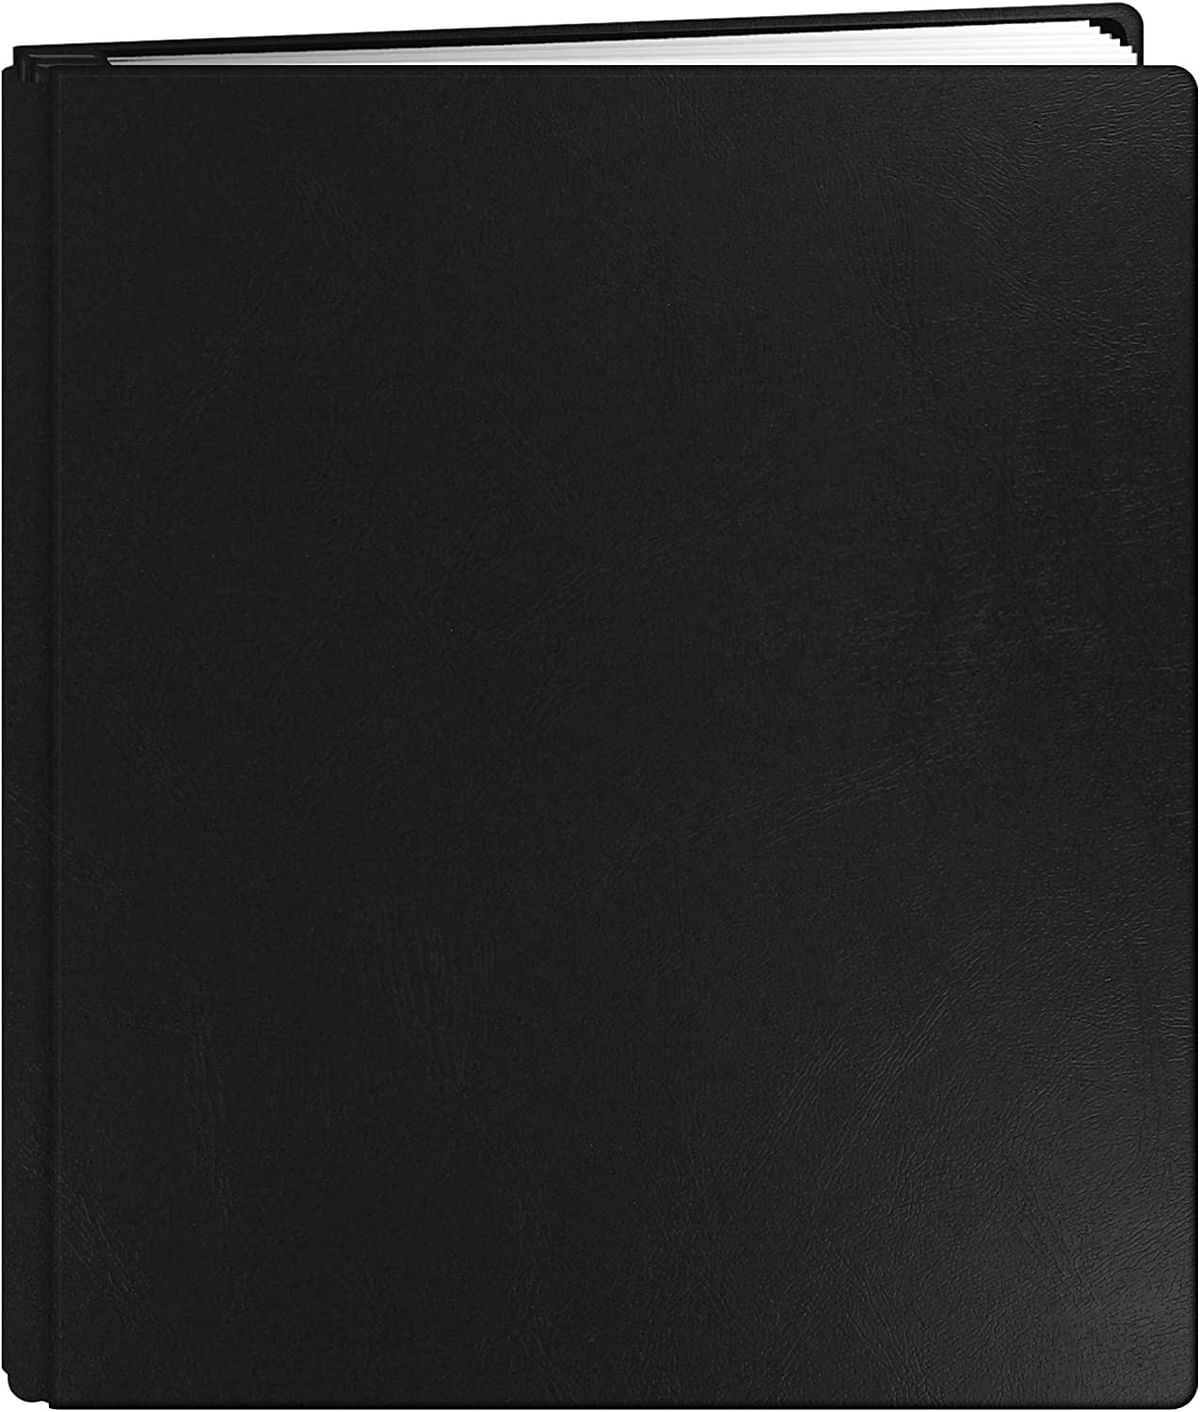 Pioneer Ftm-811L/Blk Photo Albums 20-Page Family Treasures Deluxe Black Bonded Leather Cover Scrapbook For 8.5 X 11-Inch Pages black 8.5 X 11Inch